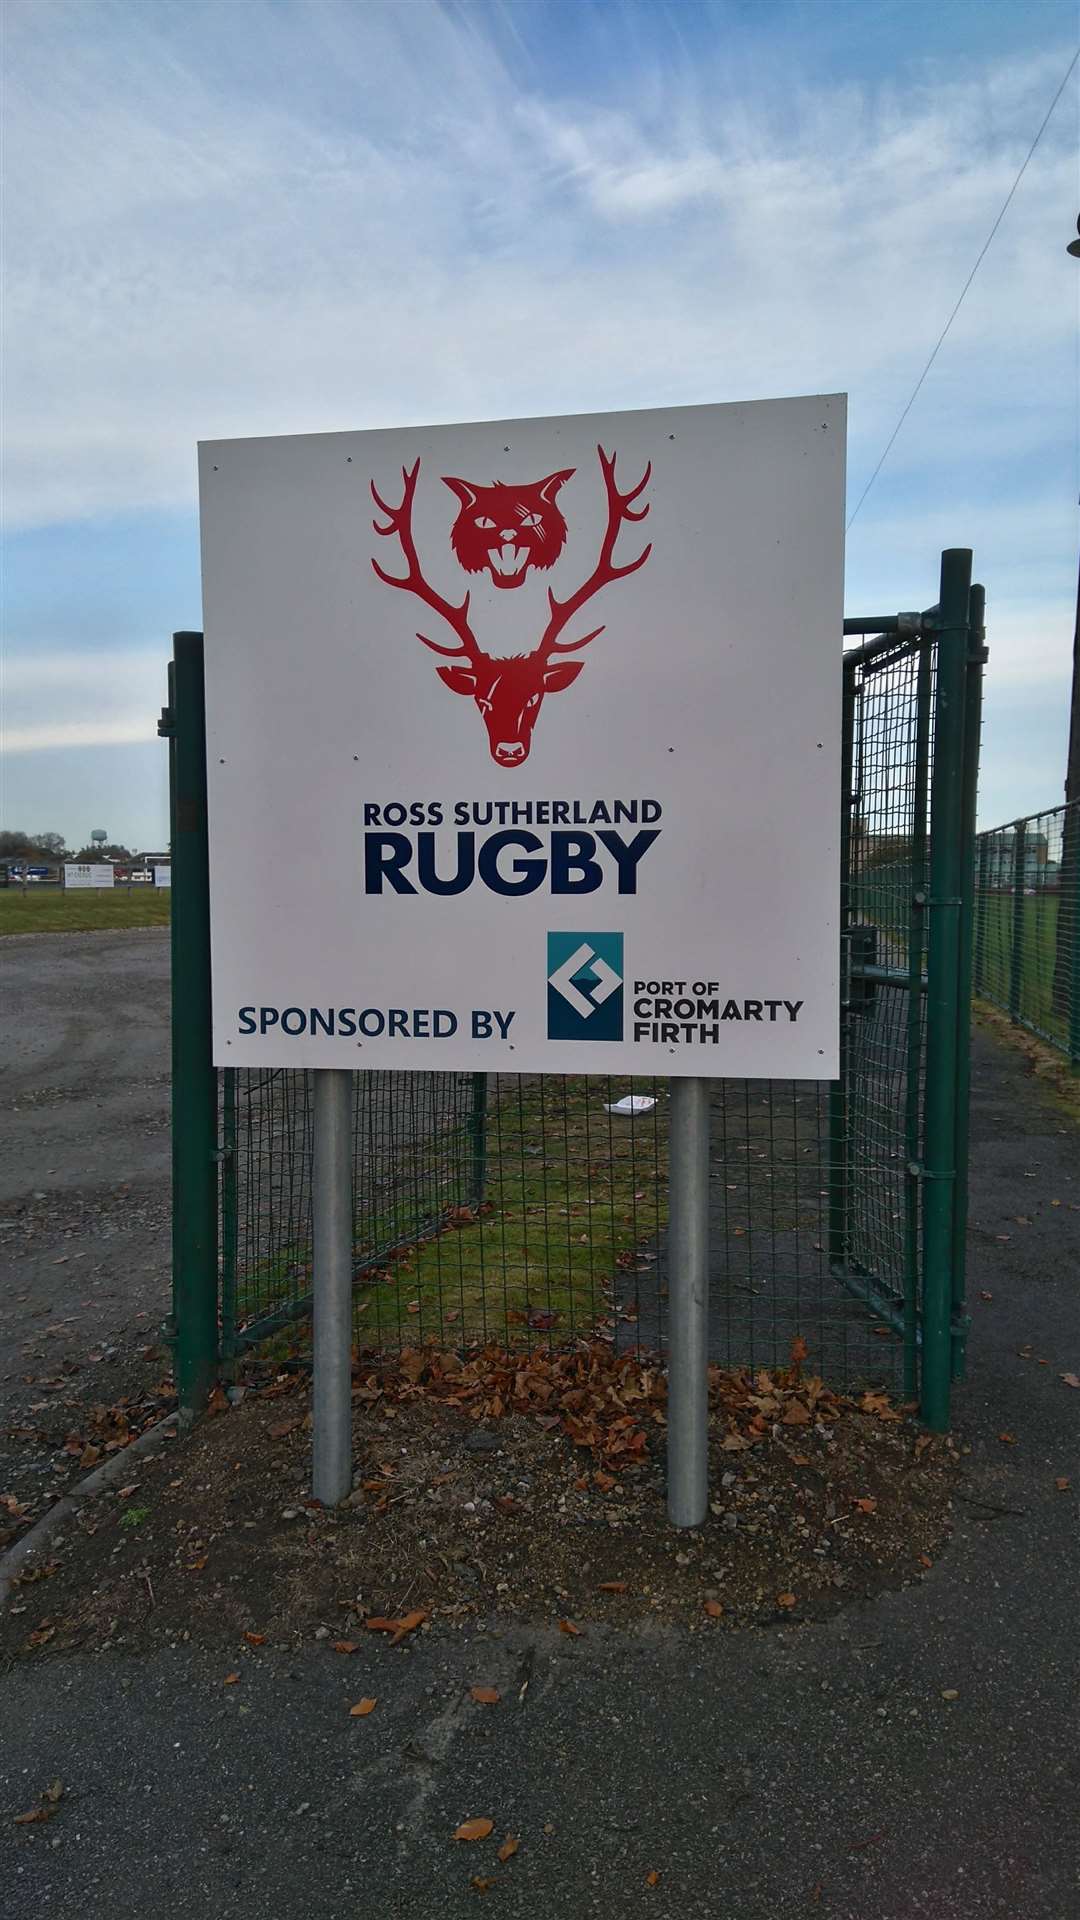 The port has long supported the rugby club.